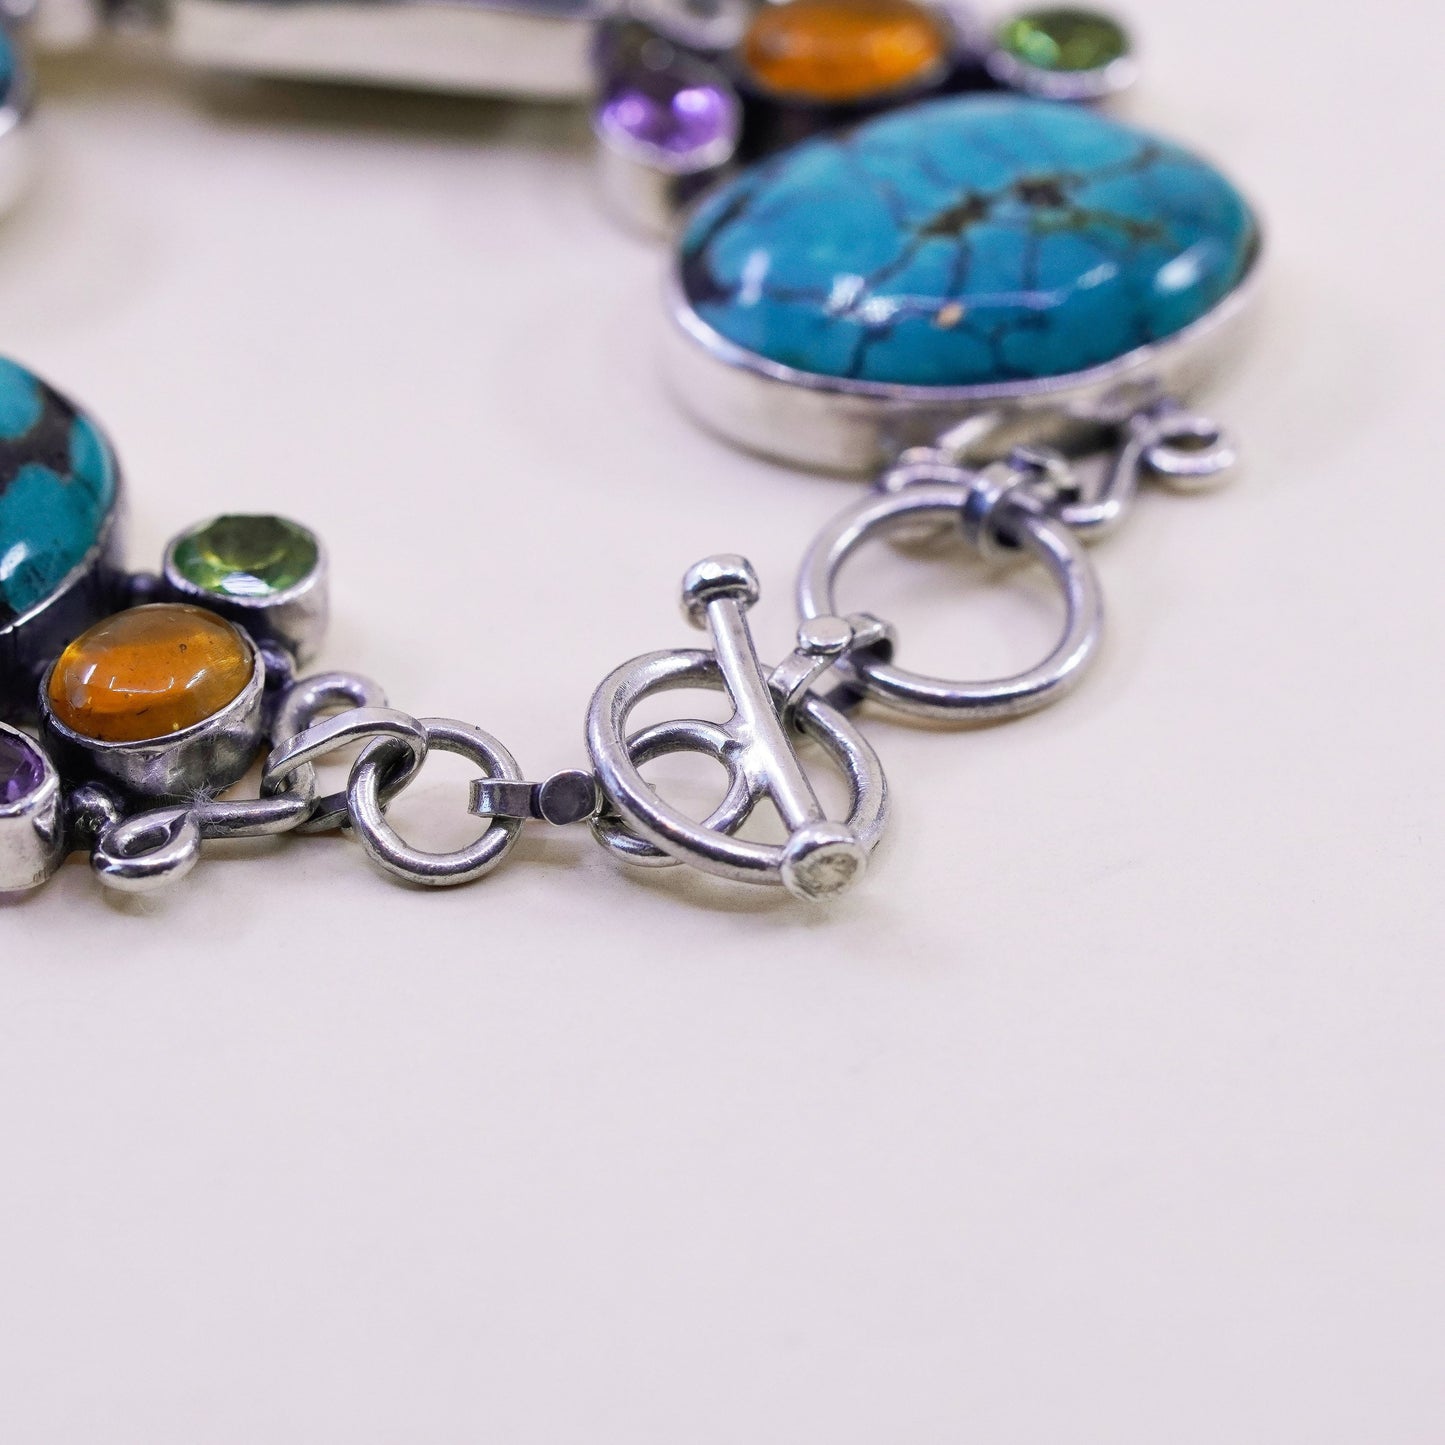 7.25”, southwestern Sterling 925 silver bracelet with dry creek turquoise amber